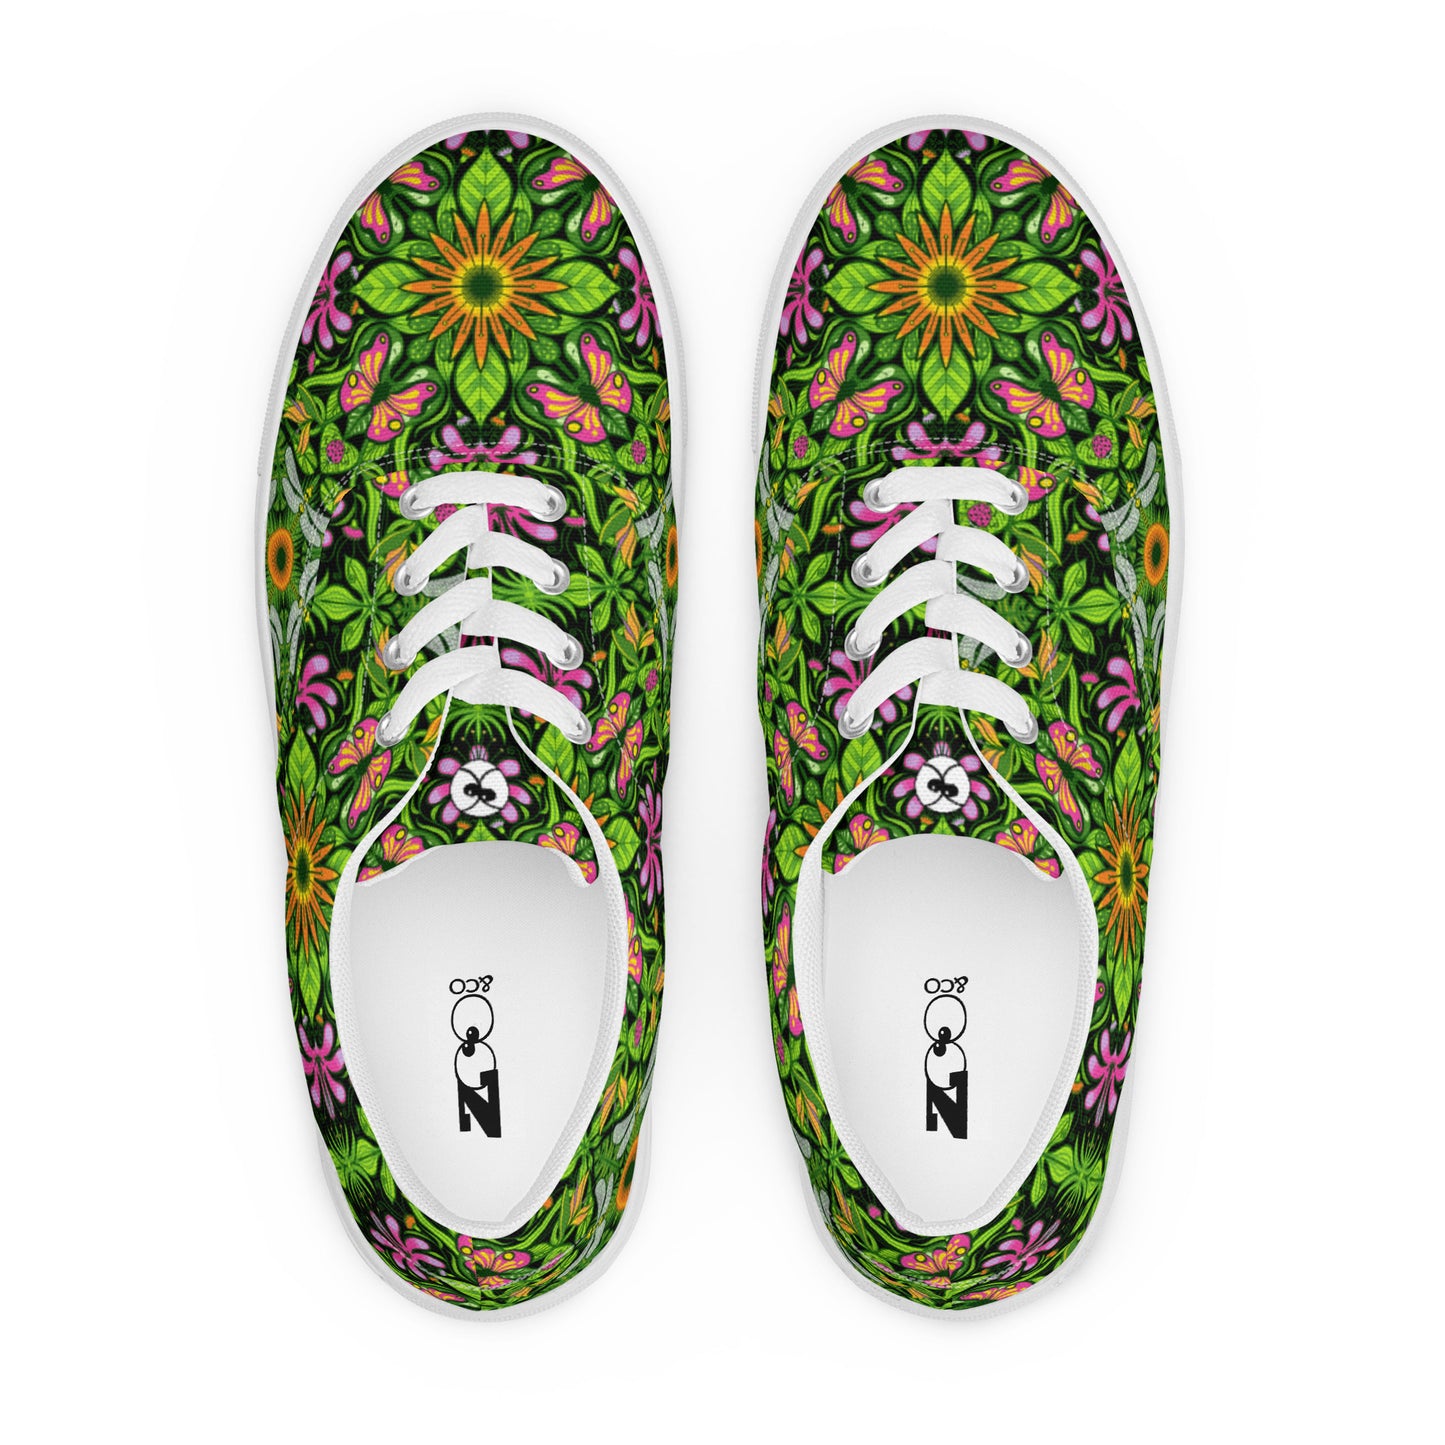 Magical garden full of flowers and insects Women’s lace-up canvas shoes. Top view